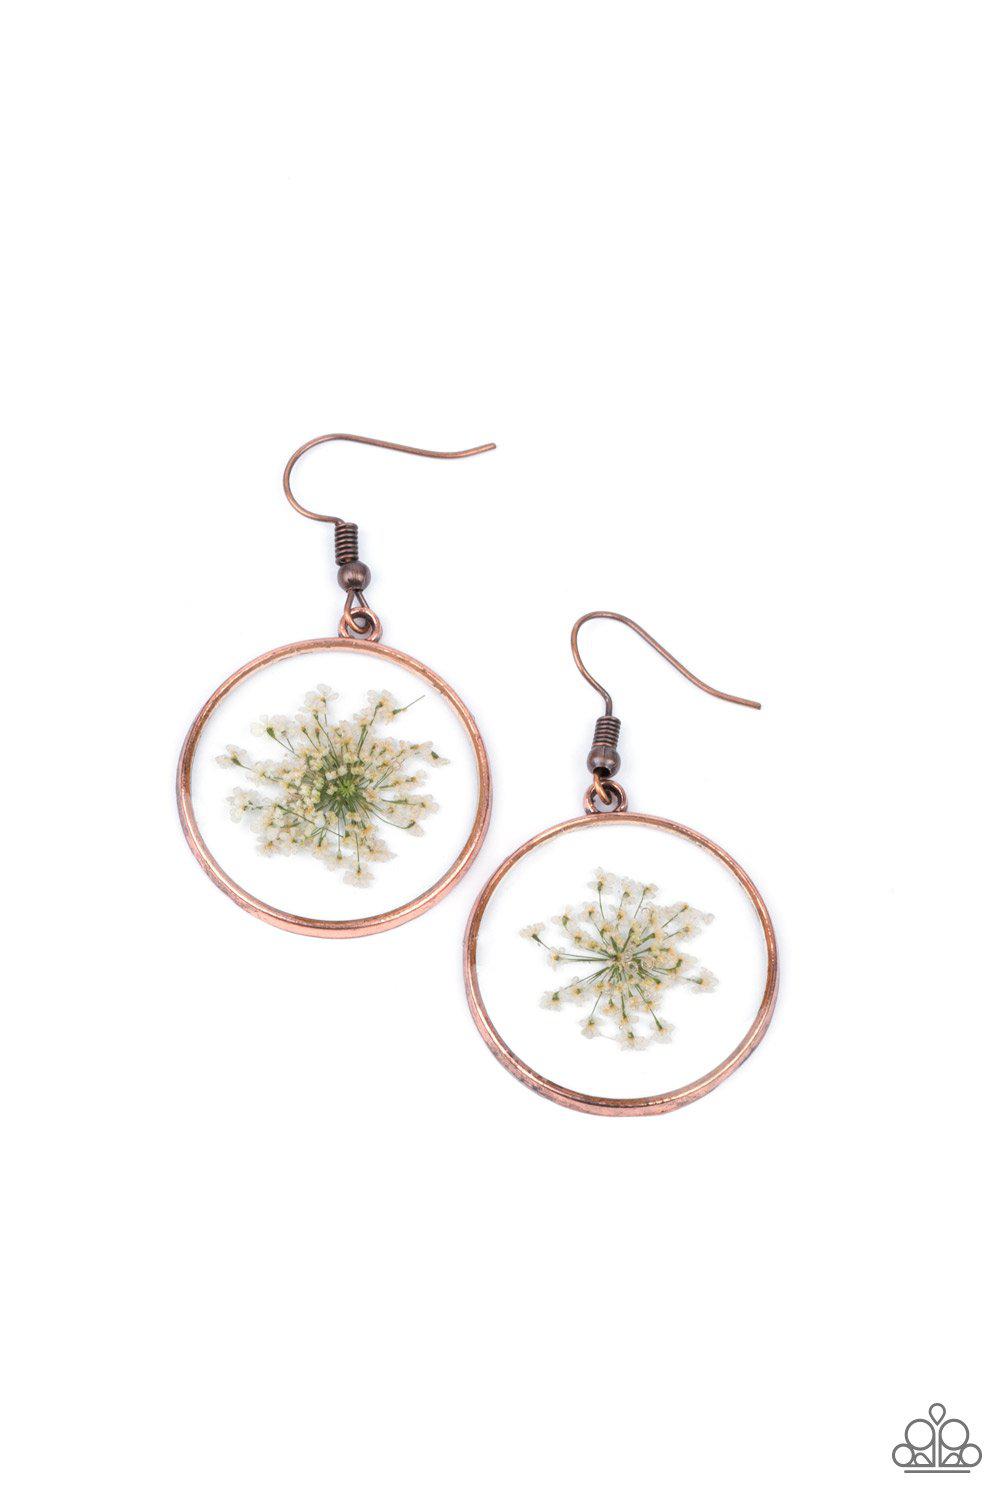 Happily Ever Eden Copper and Pressed Flower Earrings - Paparazzi Accessories- lightbox - CarasShop.com - $5 Jewelry by Cara Jewels